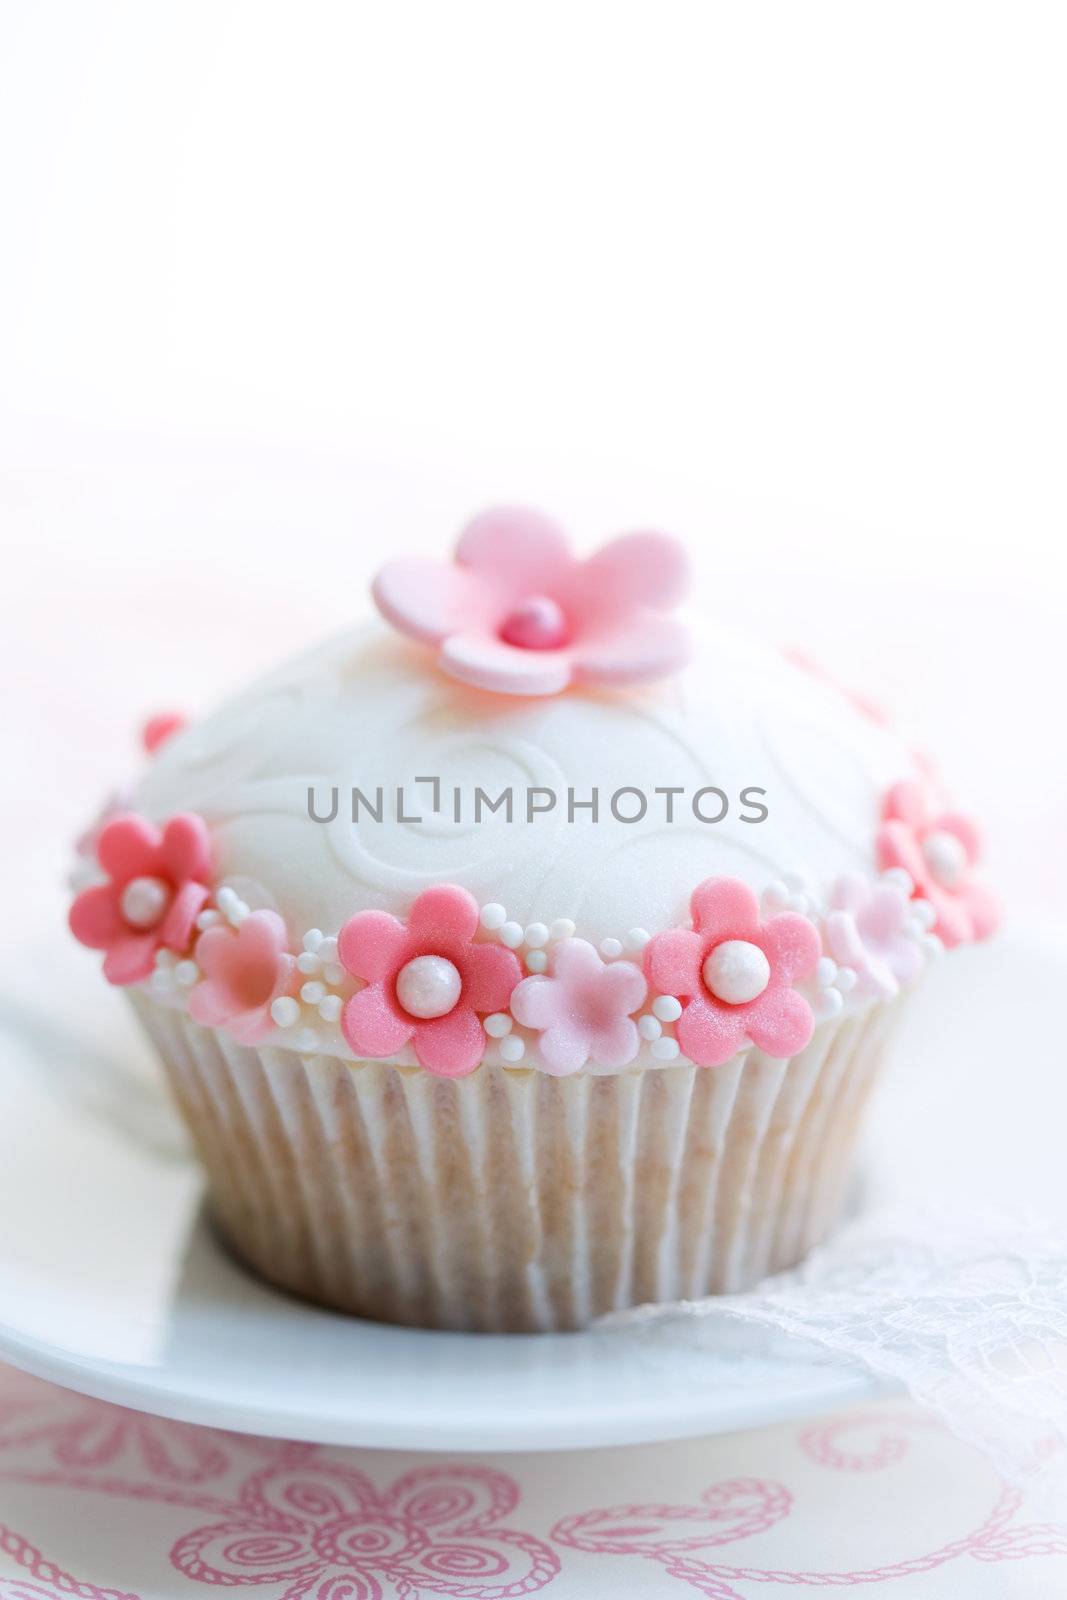 Cupcake decorated with pink and white sugar flowers